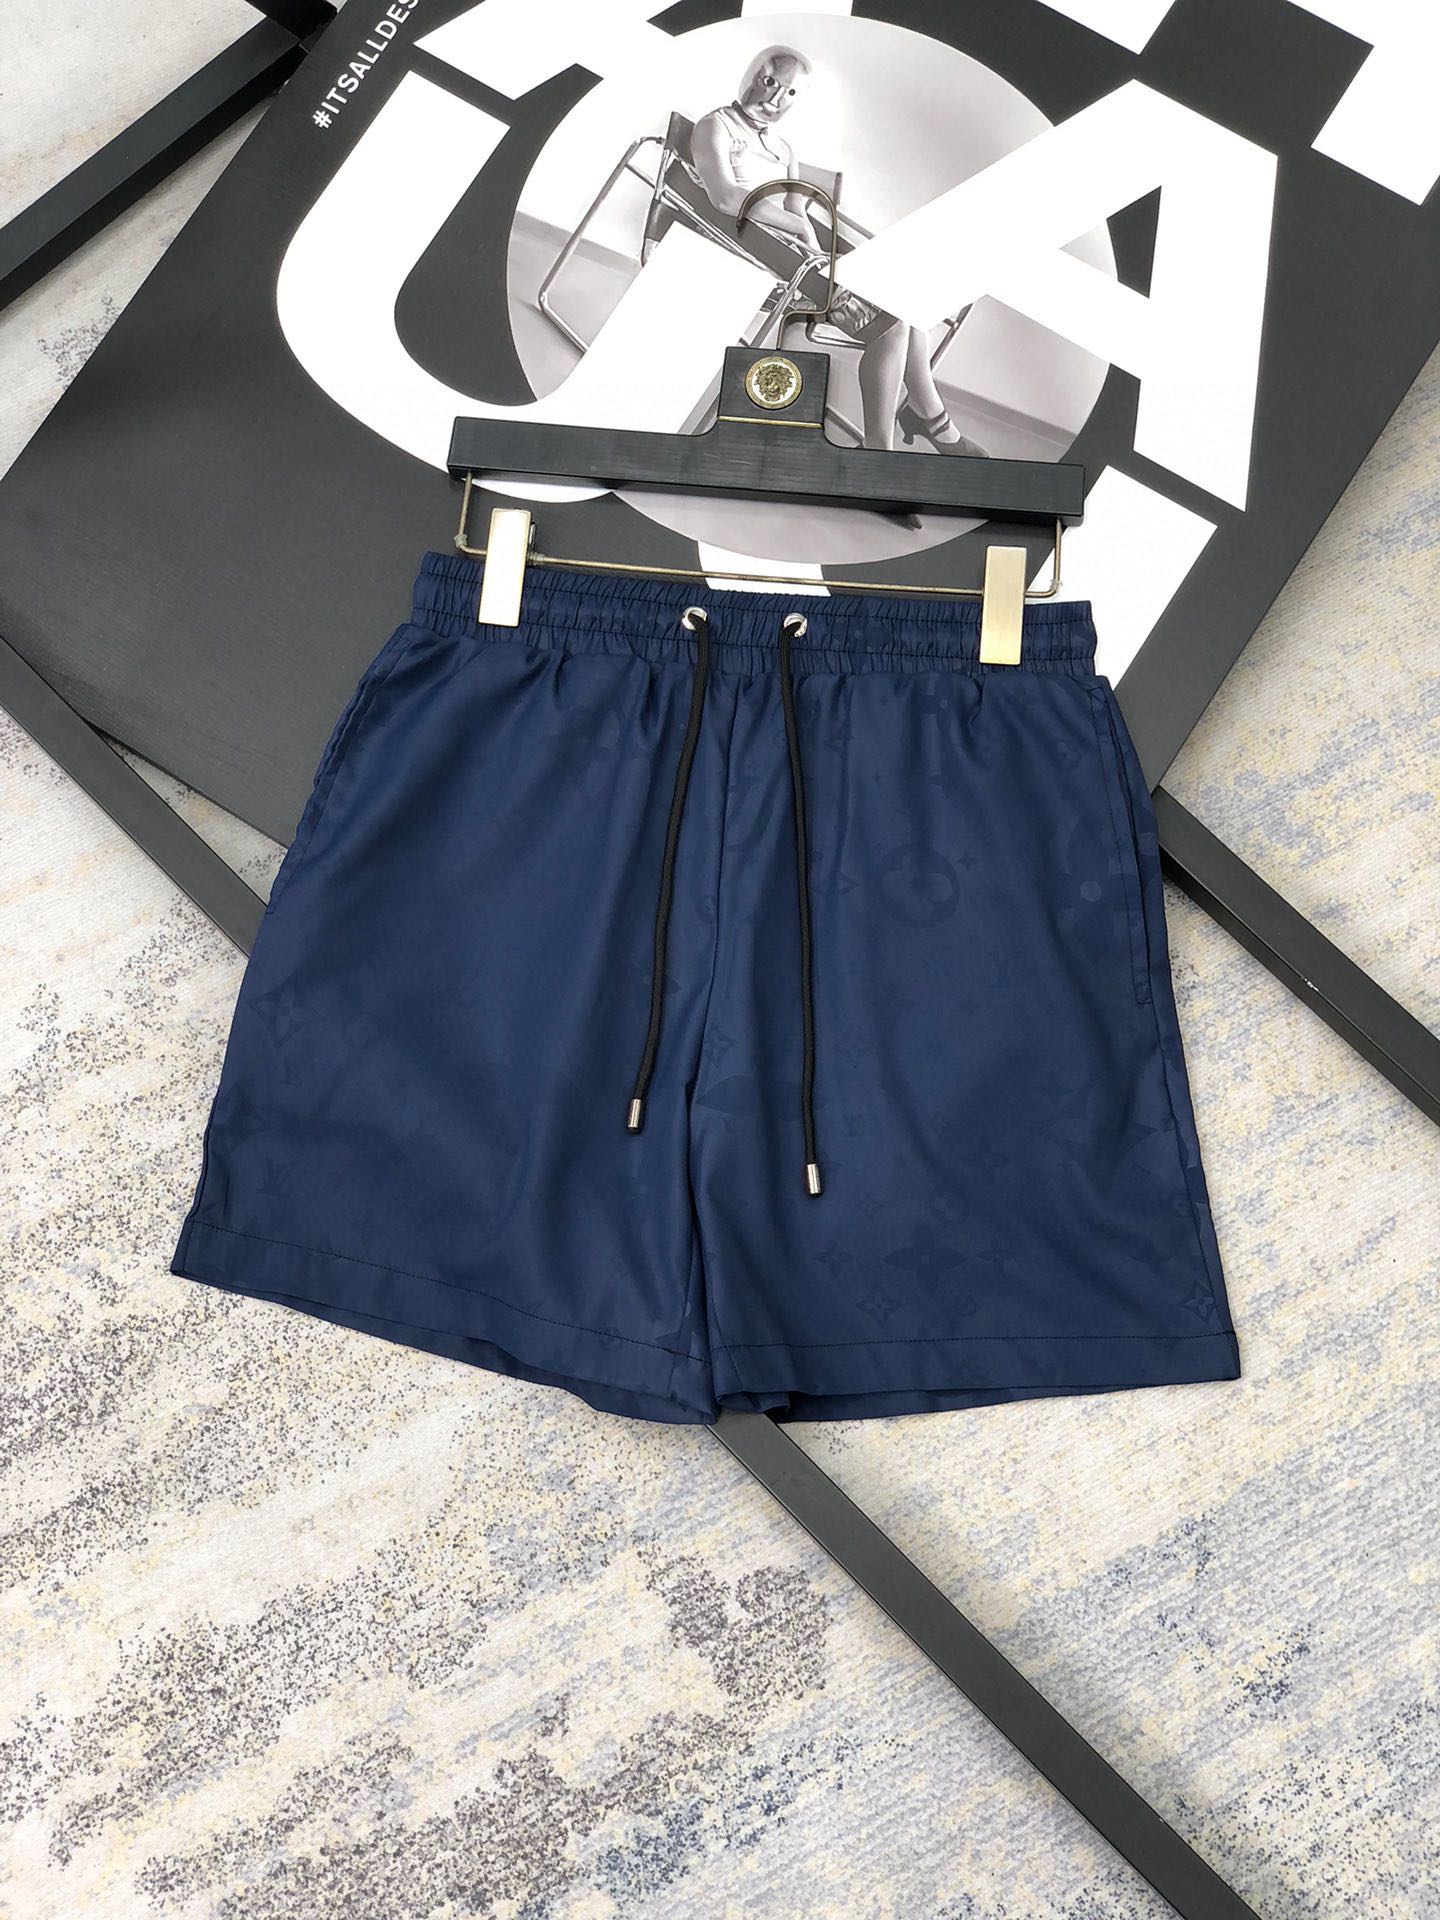 Louis Vuitton Clothing Shorts Best Replica 1:1
 Polyester Summer Collection Beach